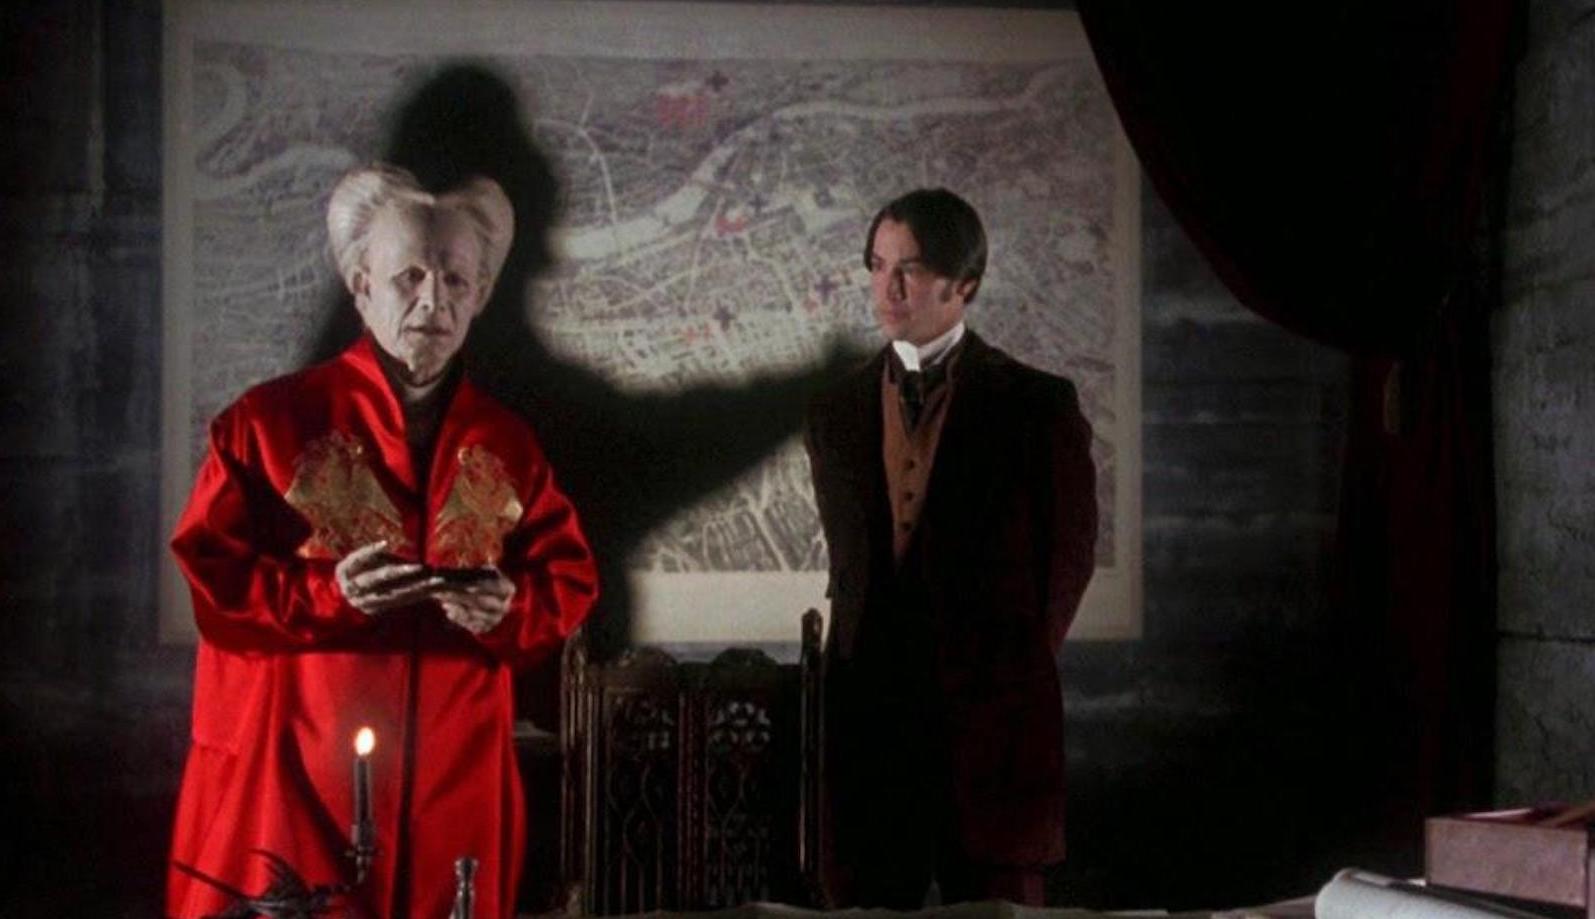 The ancient vampire Dracula dressed in a red robe in the foreground, while his shadow on the wall mimics strangling the young man standing behind him.